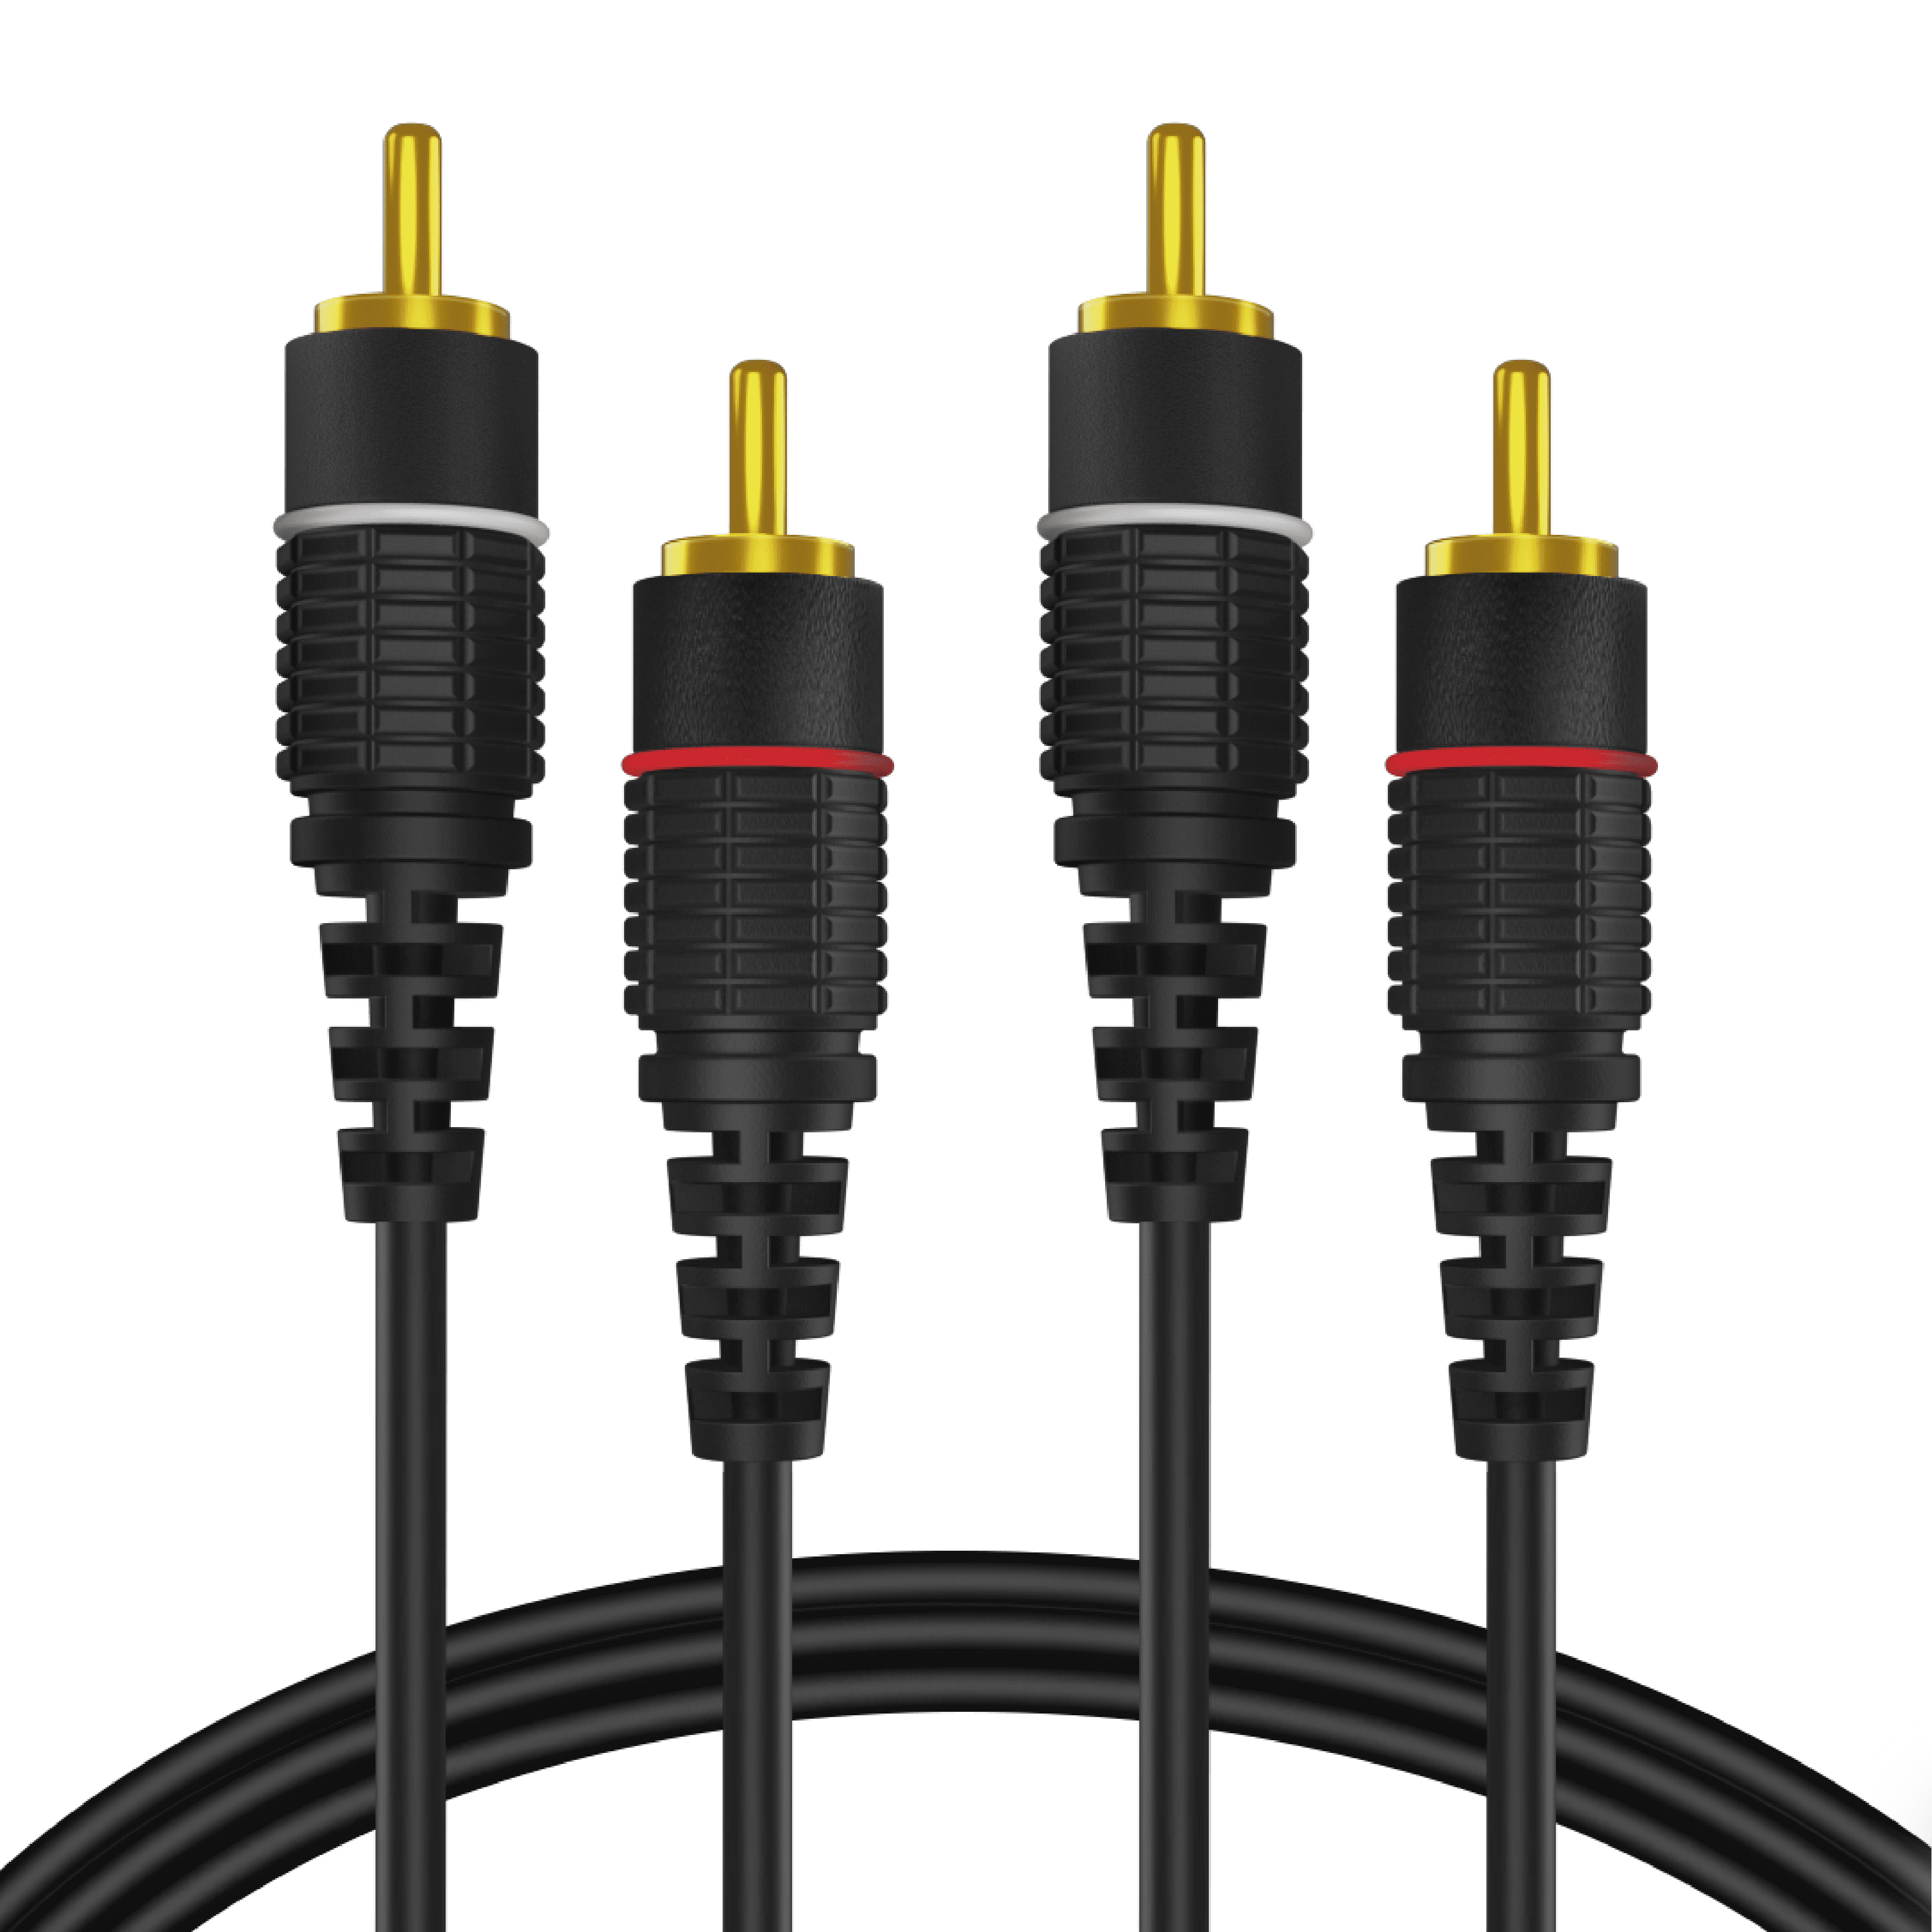  KabelDirekt – RCA/phono Y cable – 10ft long – 1 to 2 RCA/phono,  stereo audio cable (coax cable, RCA/phono male/male plugs, analog/digital,  adapter for subs/amps/Hi-Fis/home theater/receivers, black) : Electronics